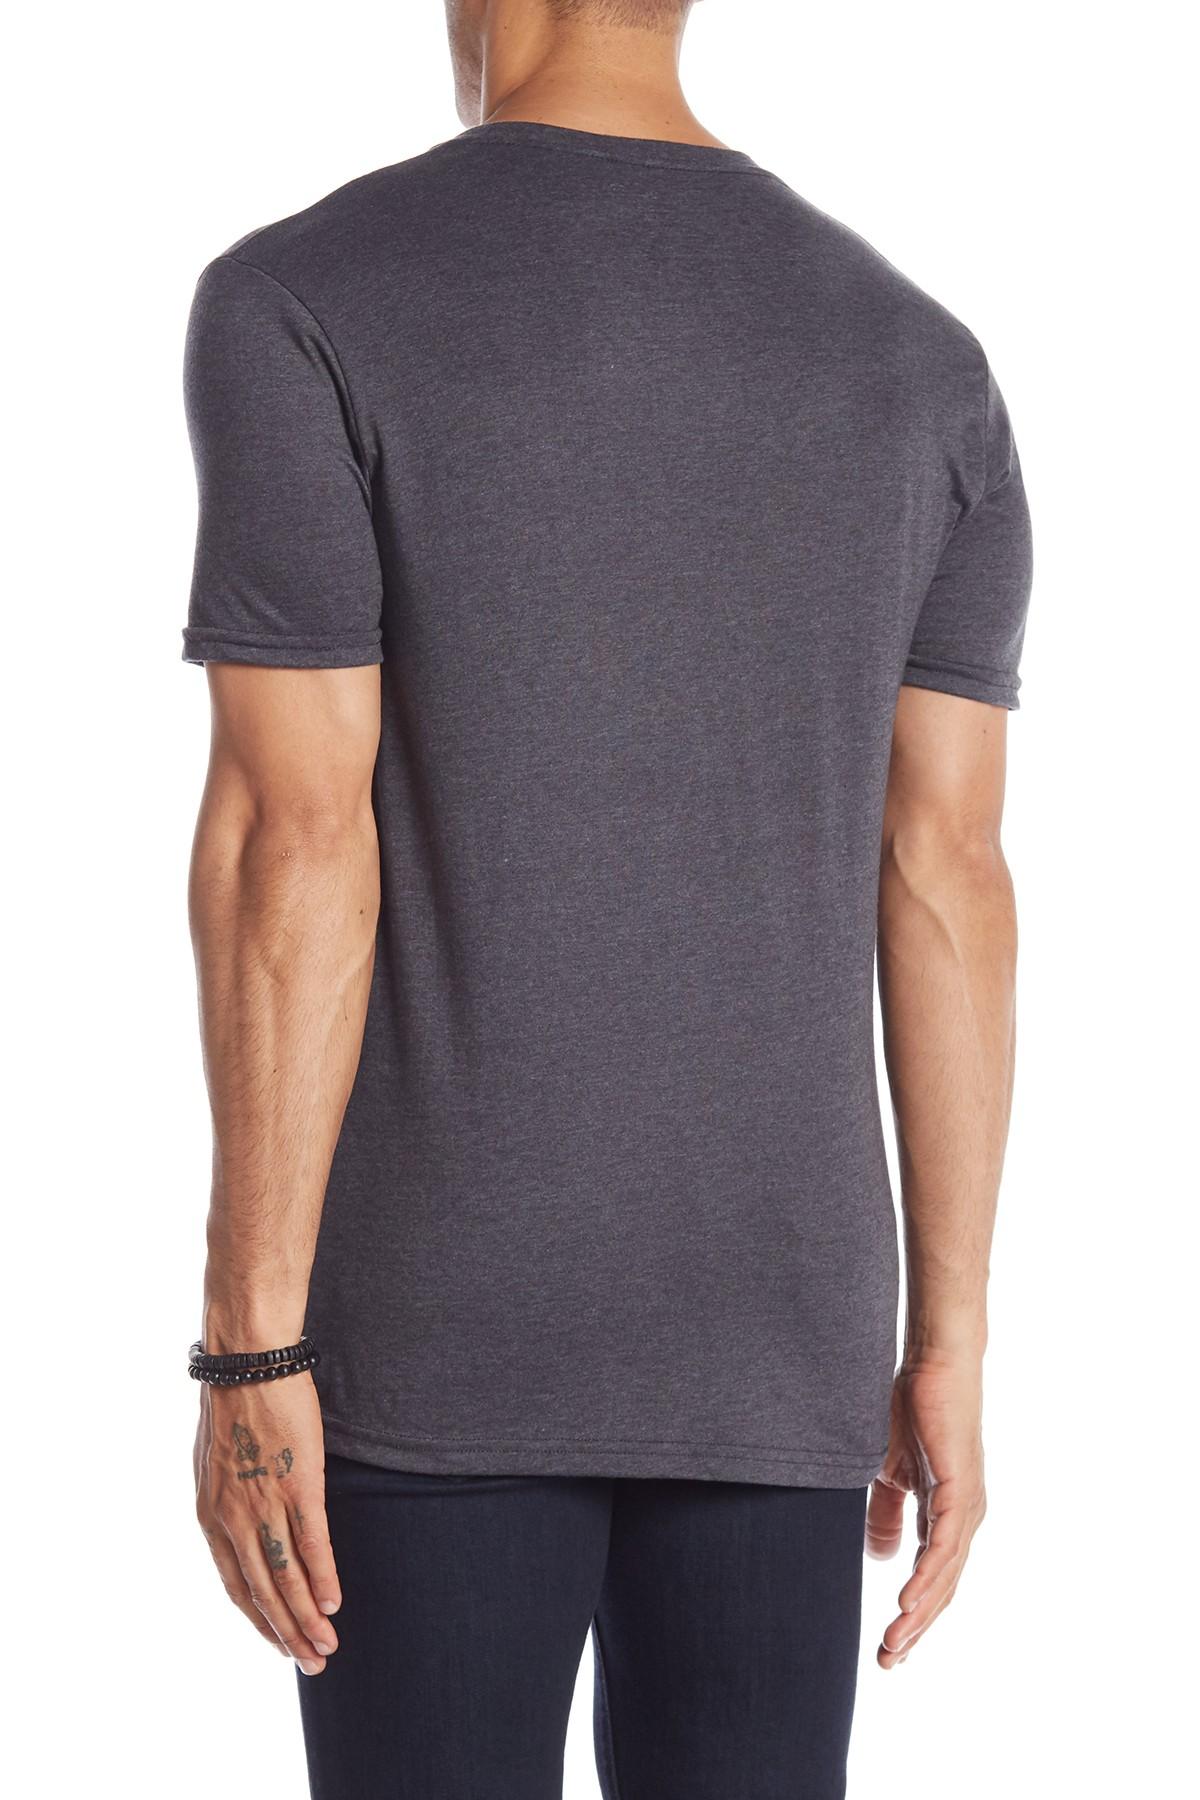 Volcom Simple Crew Neck Heathered T-shirt in Gray for Men - Lyst